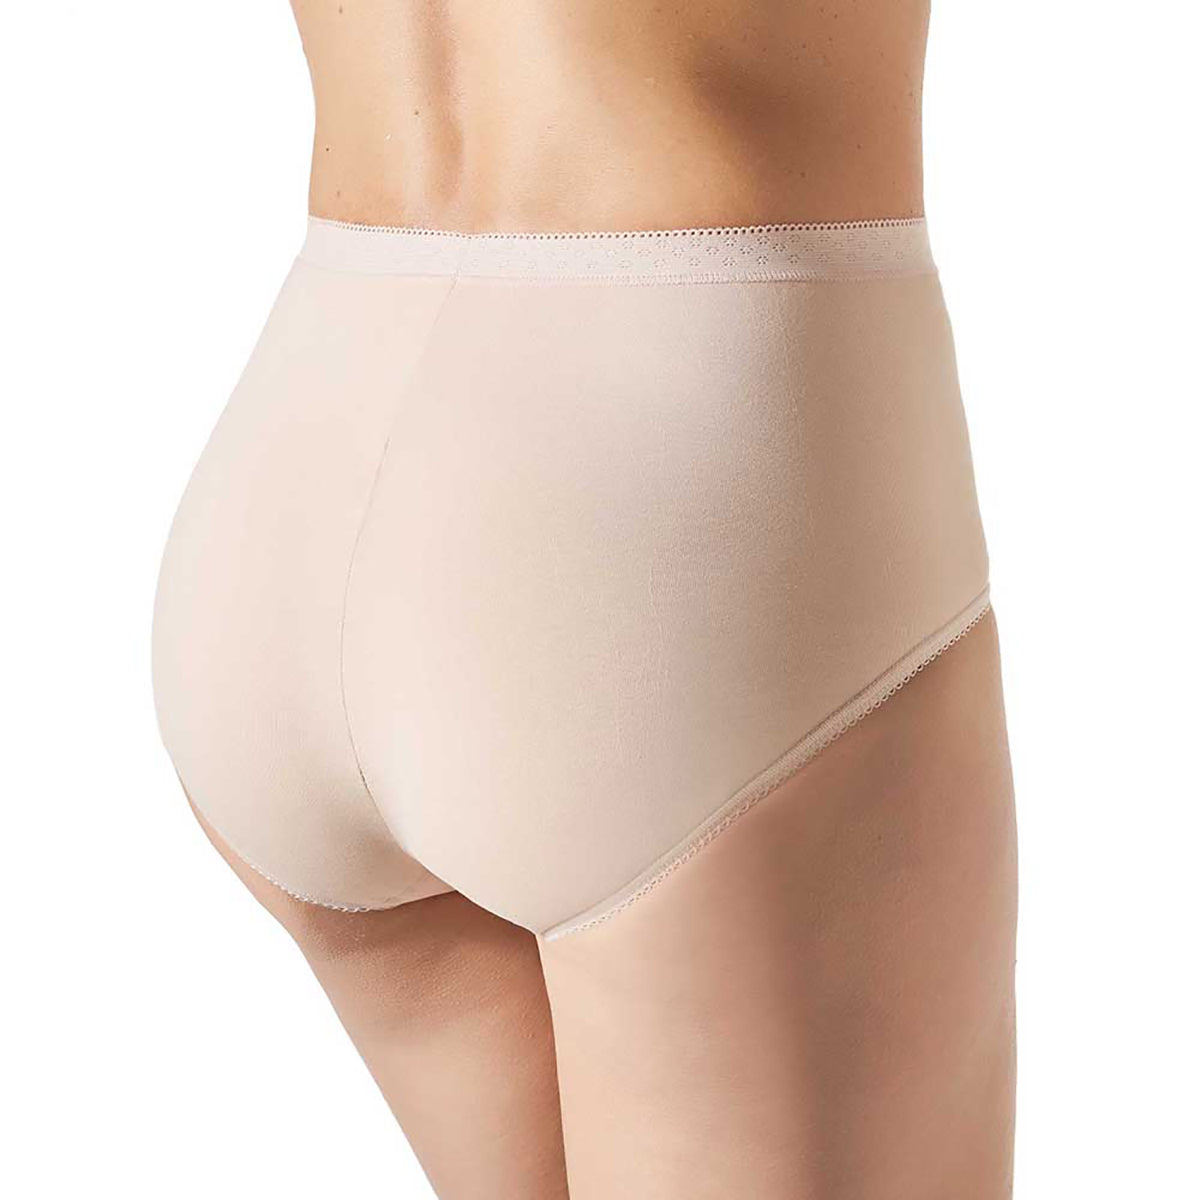 Kindly Yours Women's Seamless Thong Underwear 3-Pack, Sizes XS to XXXL 